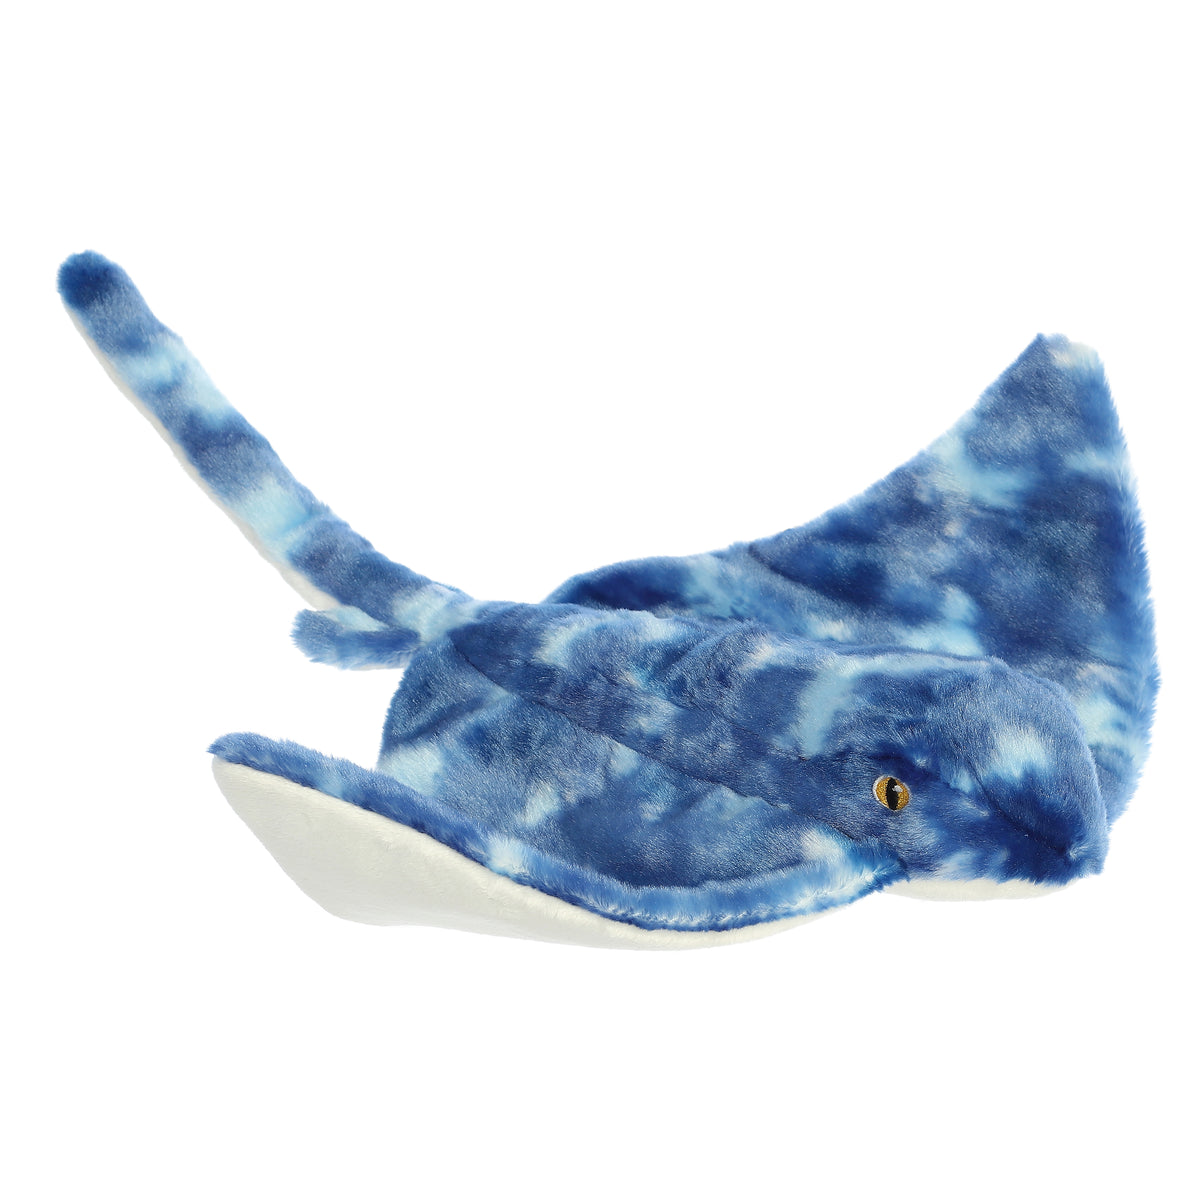 Stingray stuffed animal in striking blue with lifelike details and soft fins from Destination Nation by Aurora.